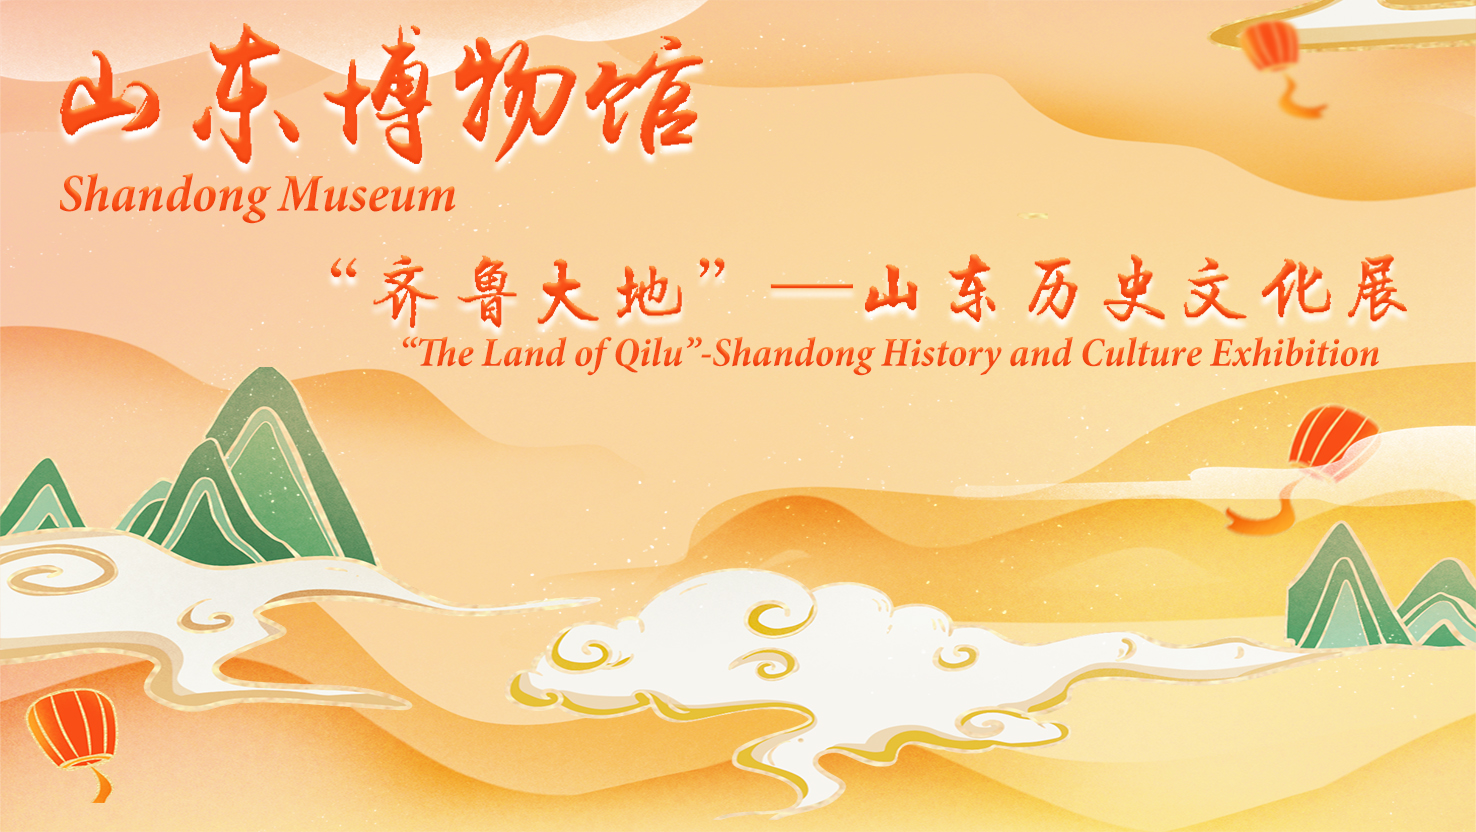 Shandong Museum：“The Land of Qilu”-Shandong History and Culture Exhibition